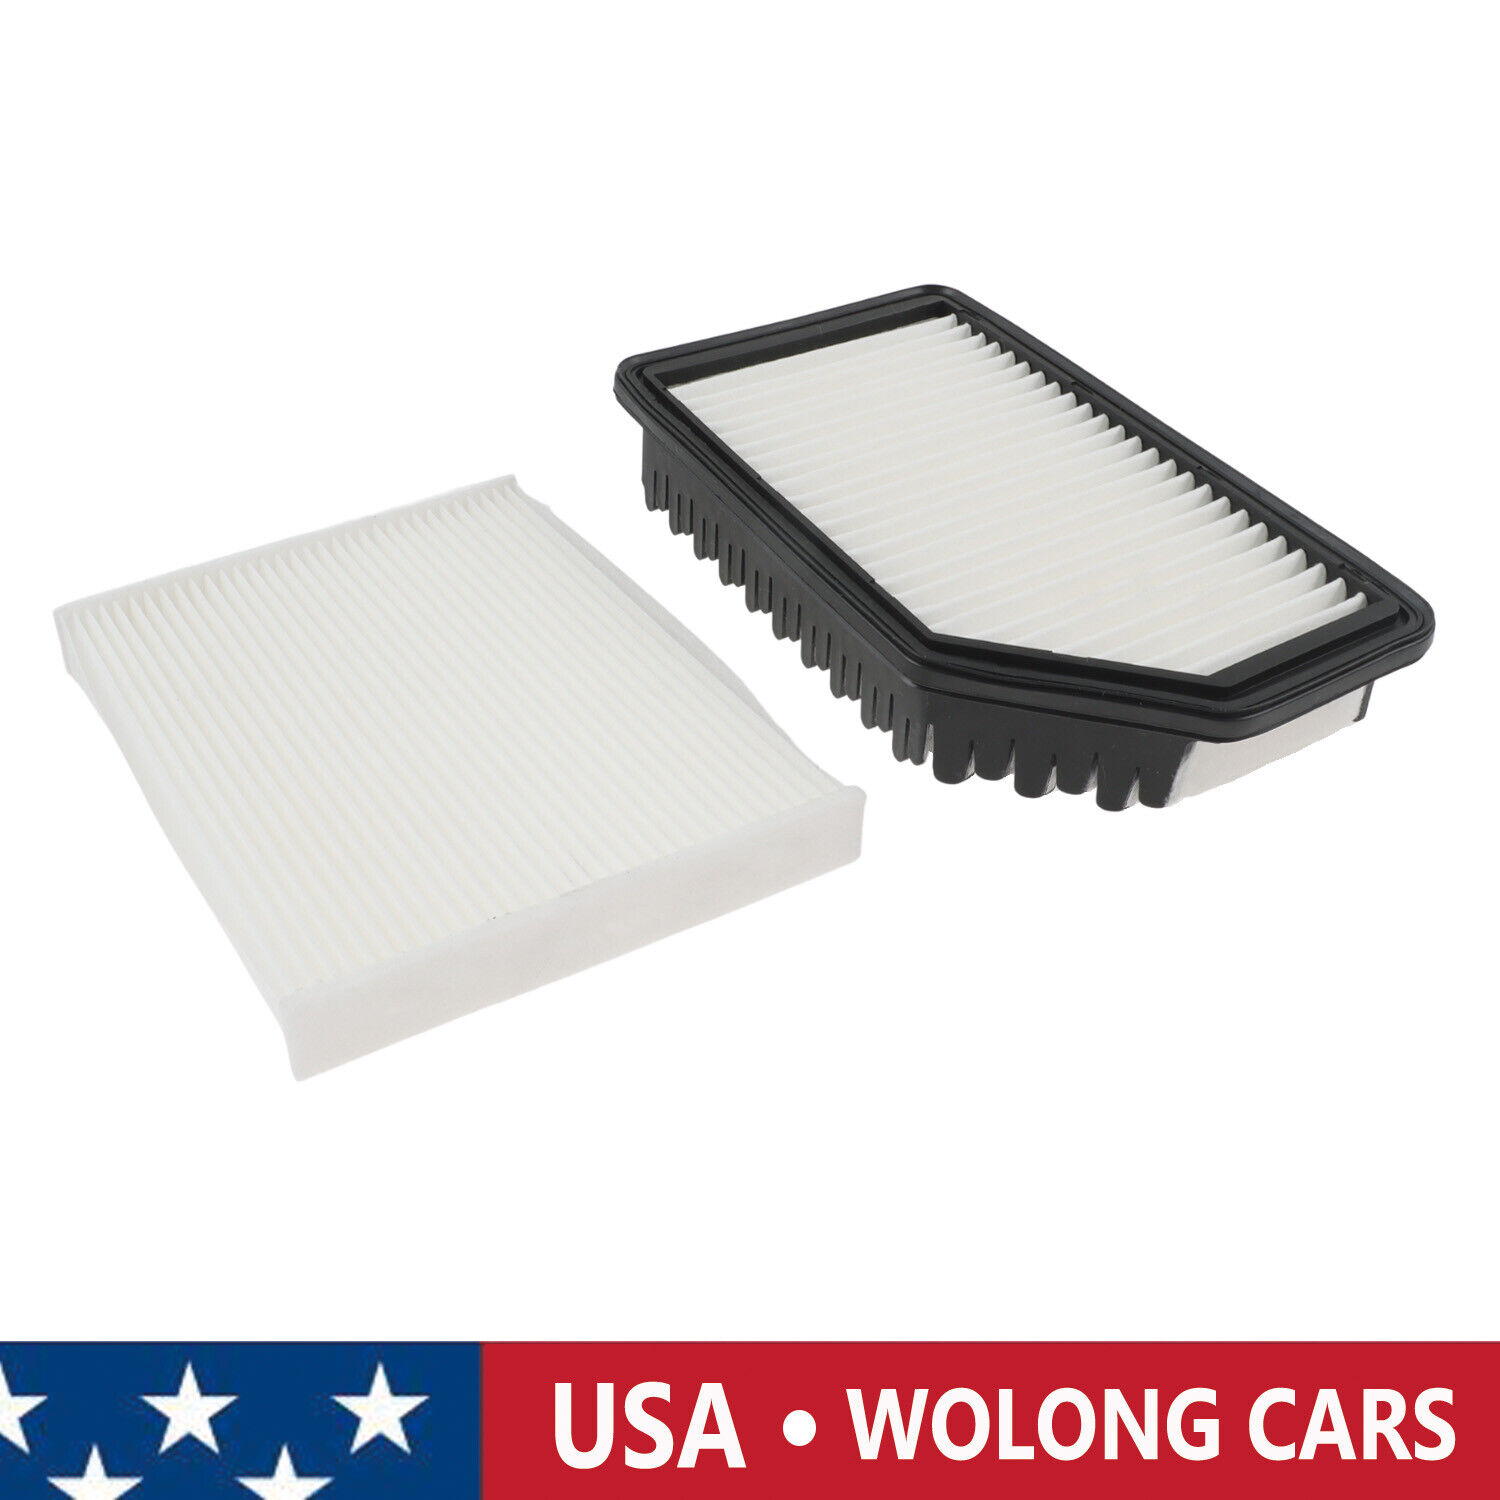 Cabin Air Filter and Engine Air Filter for Kia Soul Rio Hyundai Accent Veloster